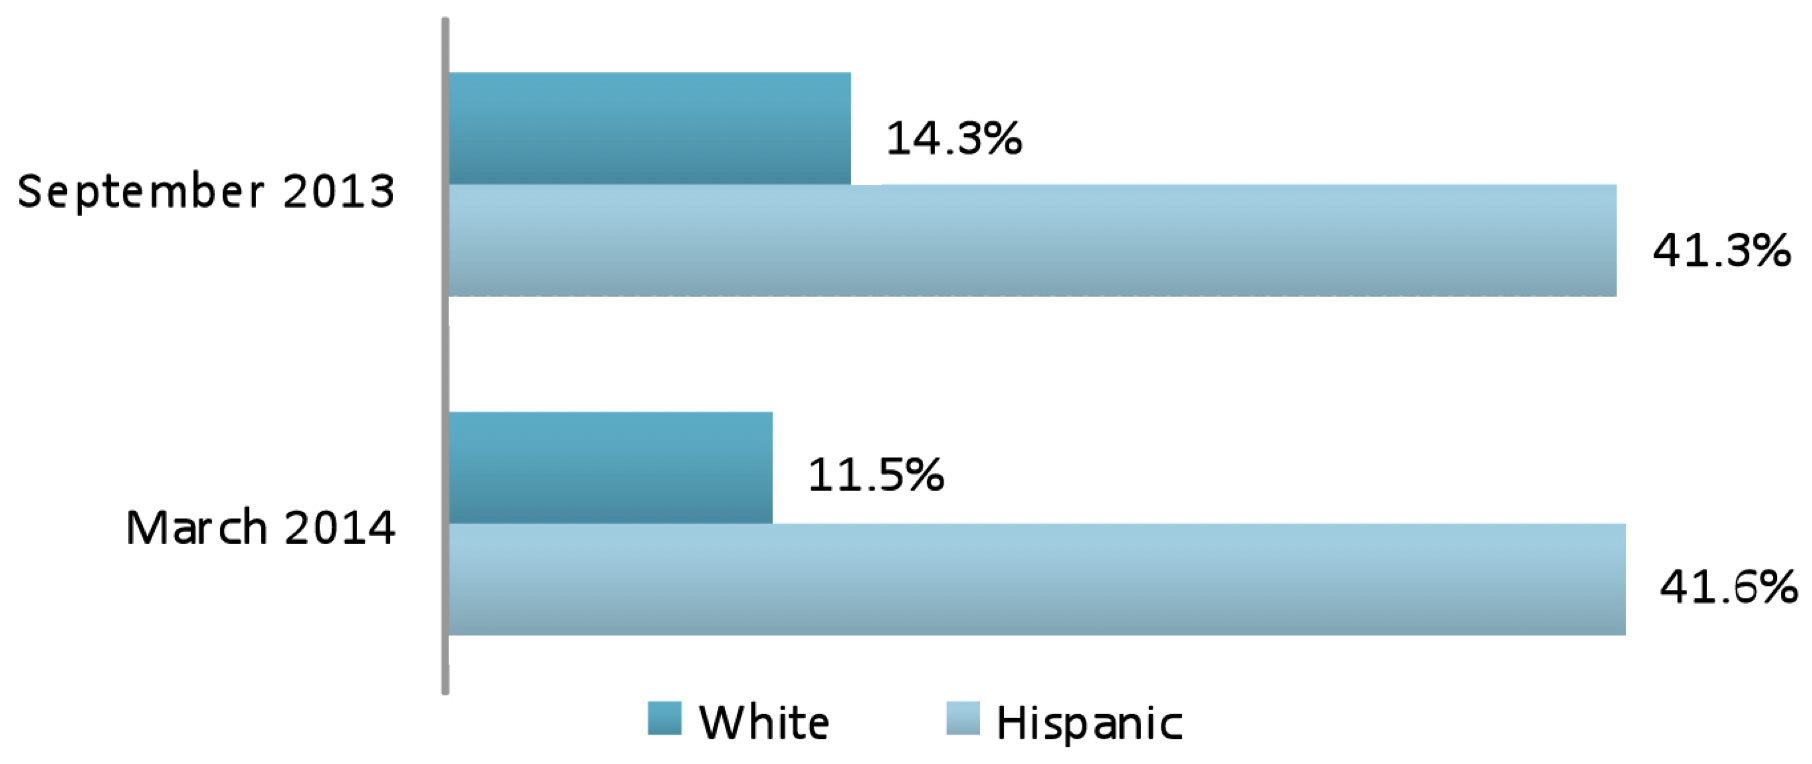 This graph compares the percent uninsured of the white and Hispanic populations in Texas over time.